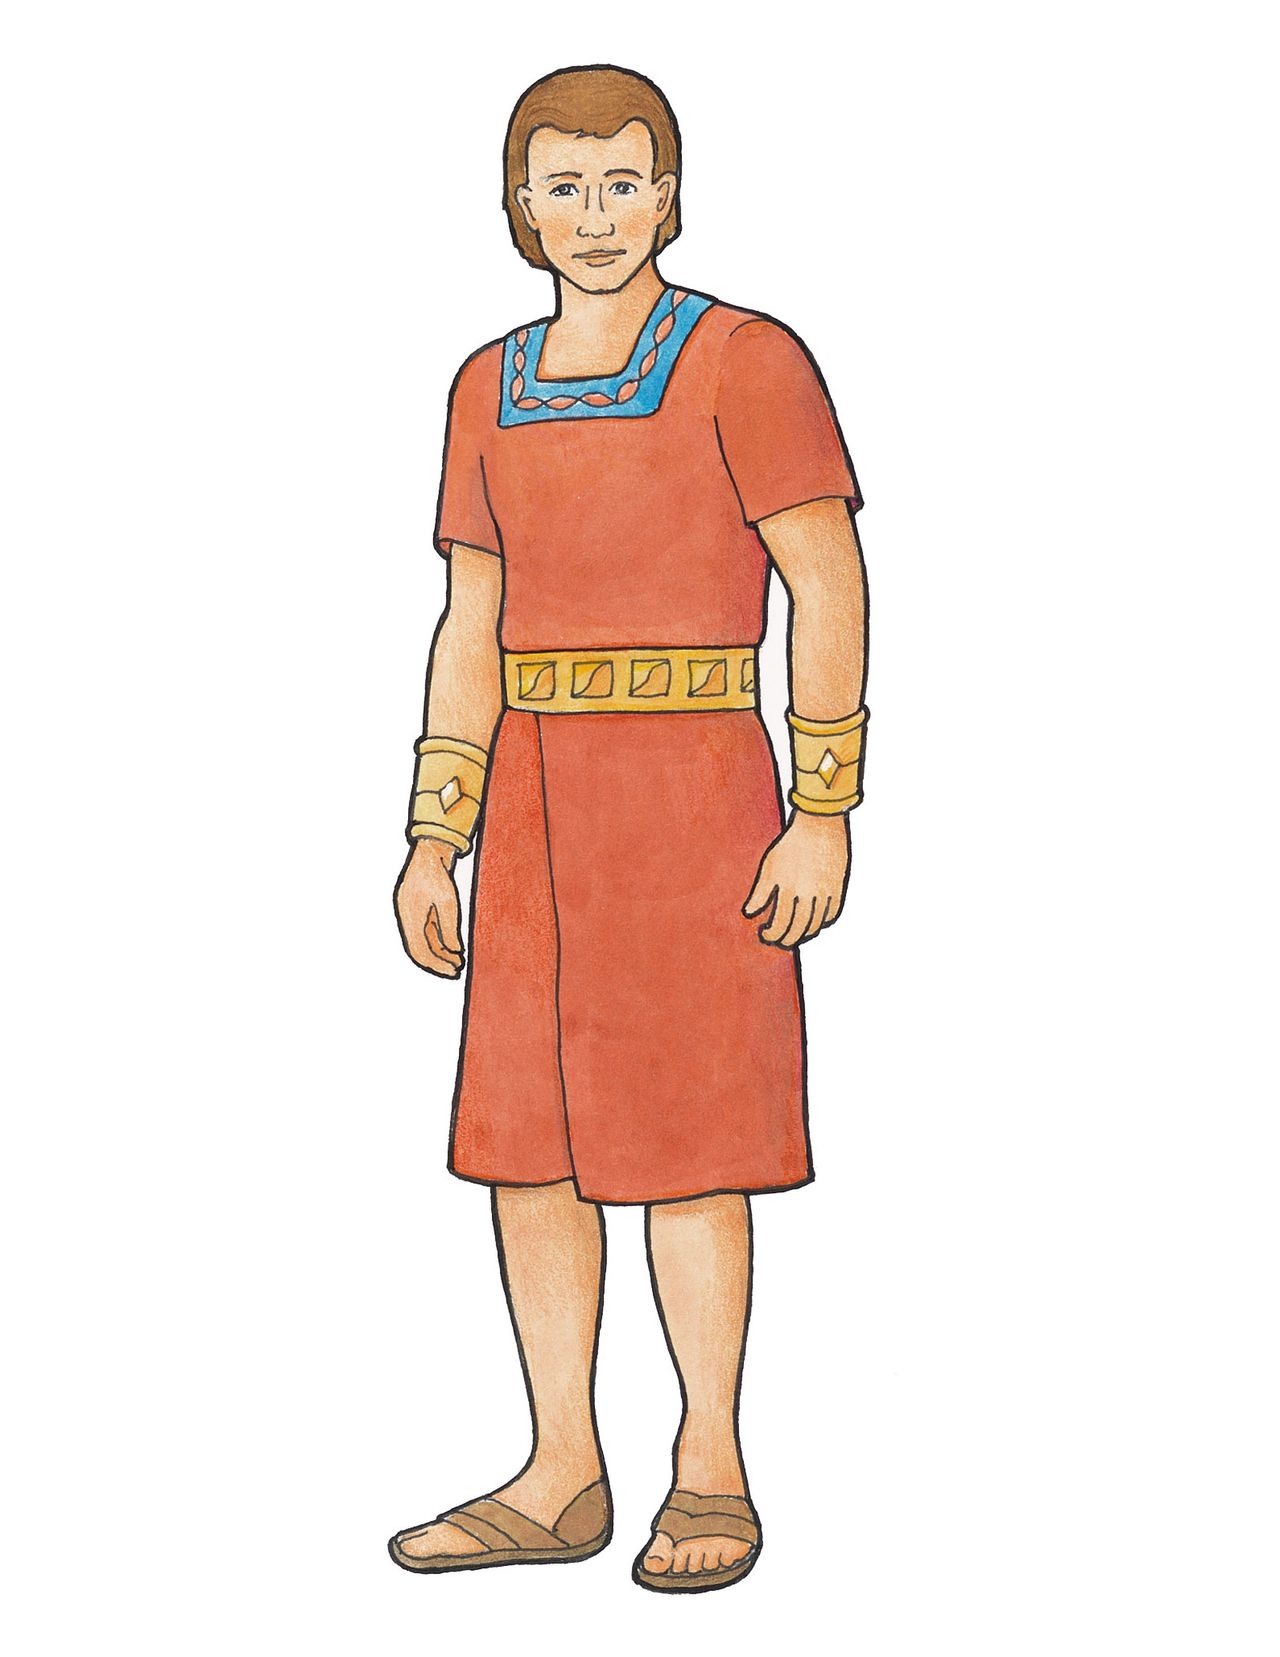 Alma, a character from the Book of Mormon, dressed in traditional clothing.